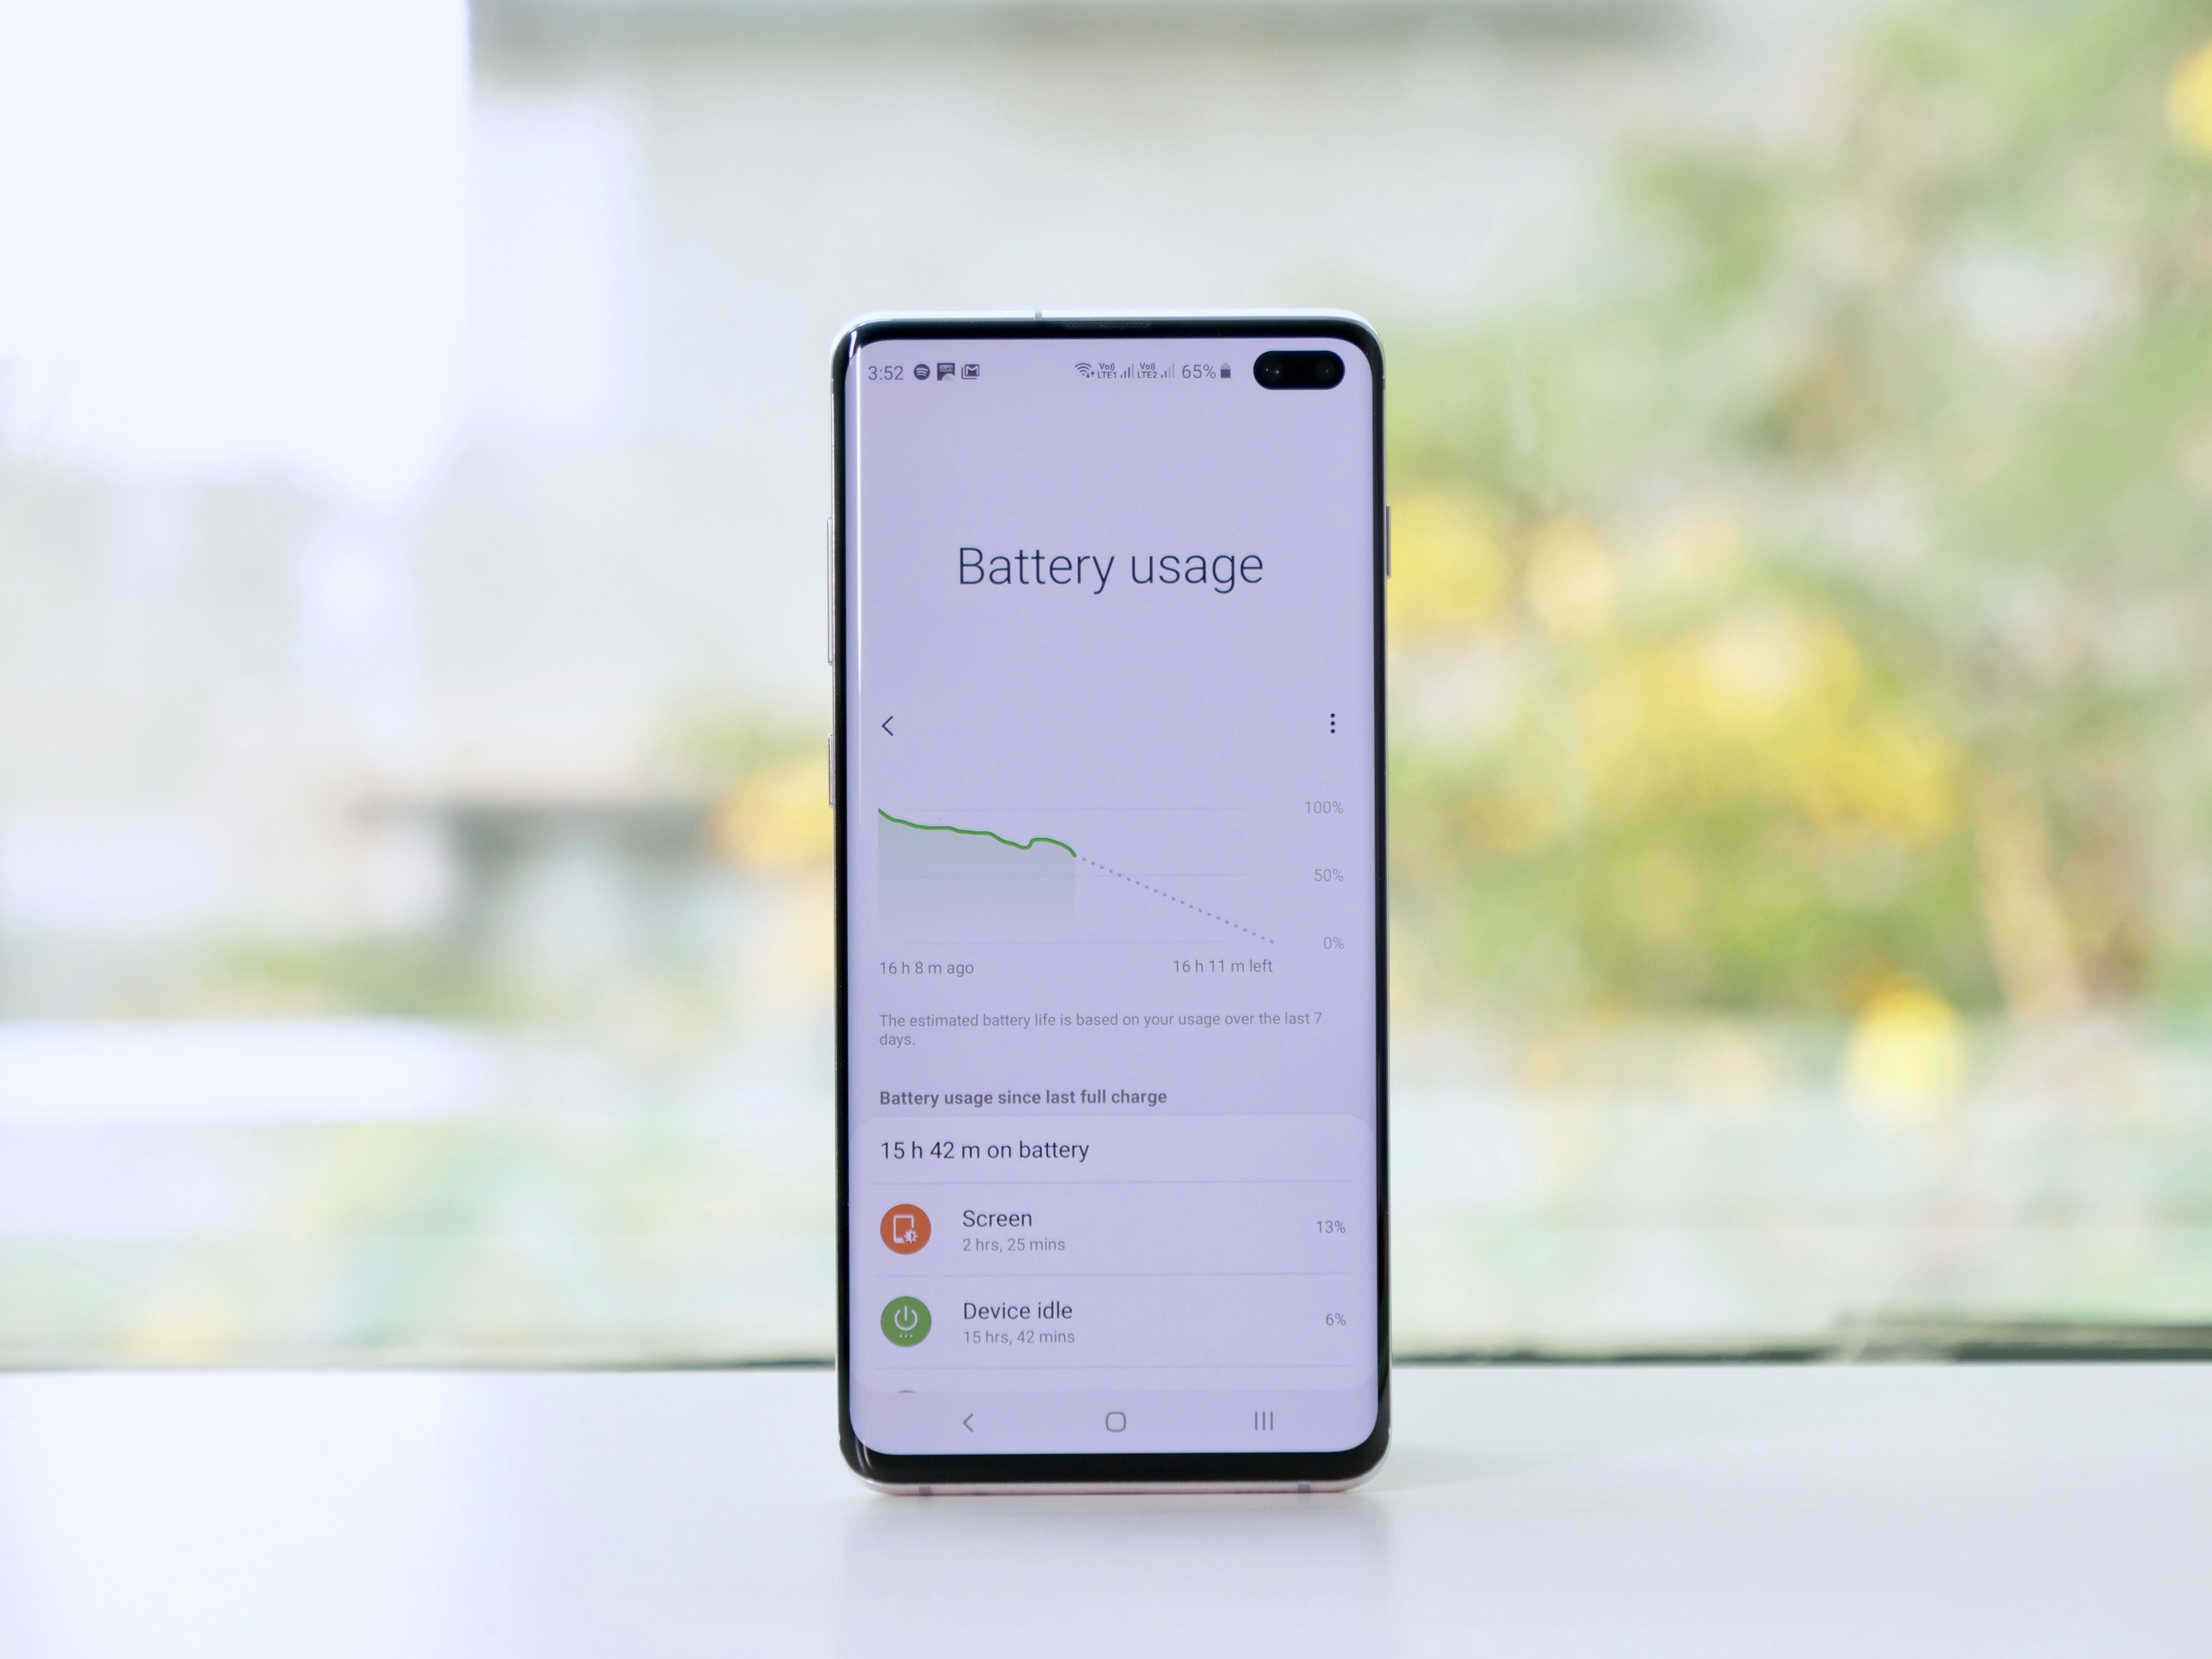 Samsung Galaxy S10 Plus review: Almost a masterpiece! - SamMobile